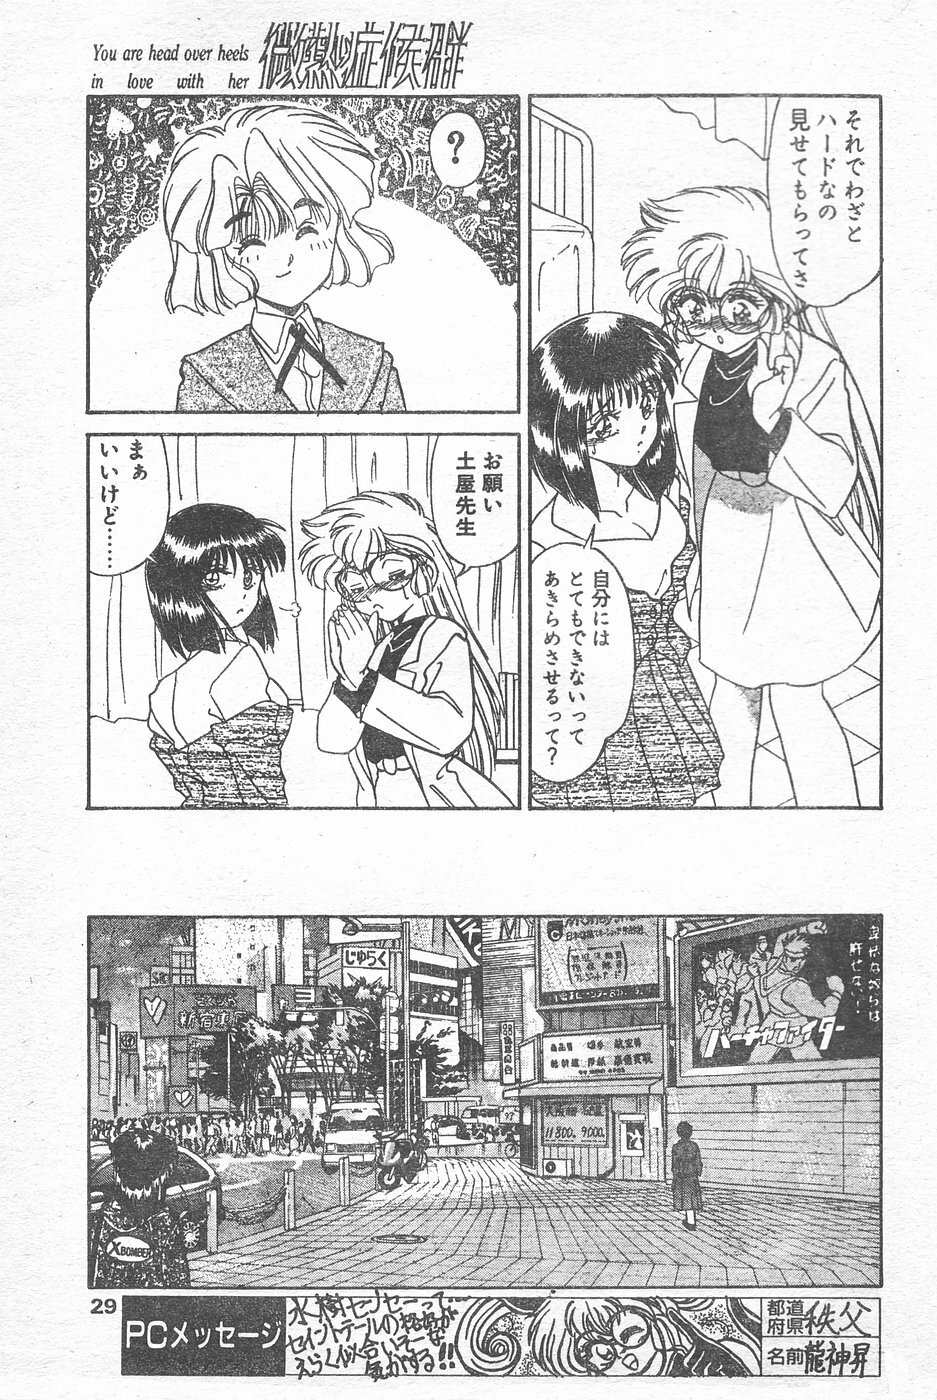 COMIC Penguin Club 1996-01 page 28 full